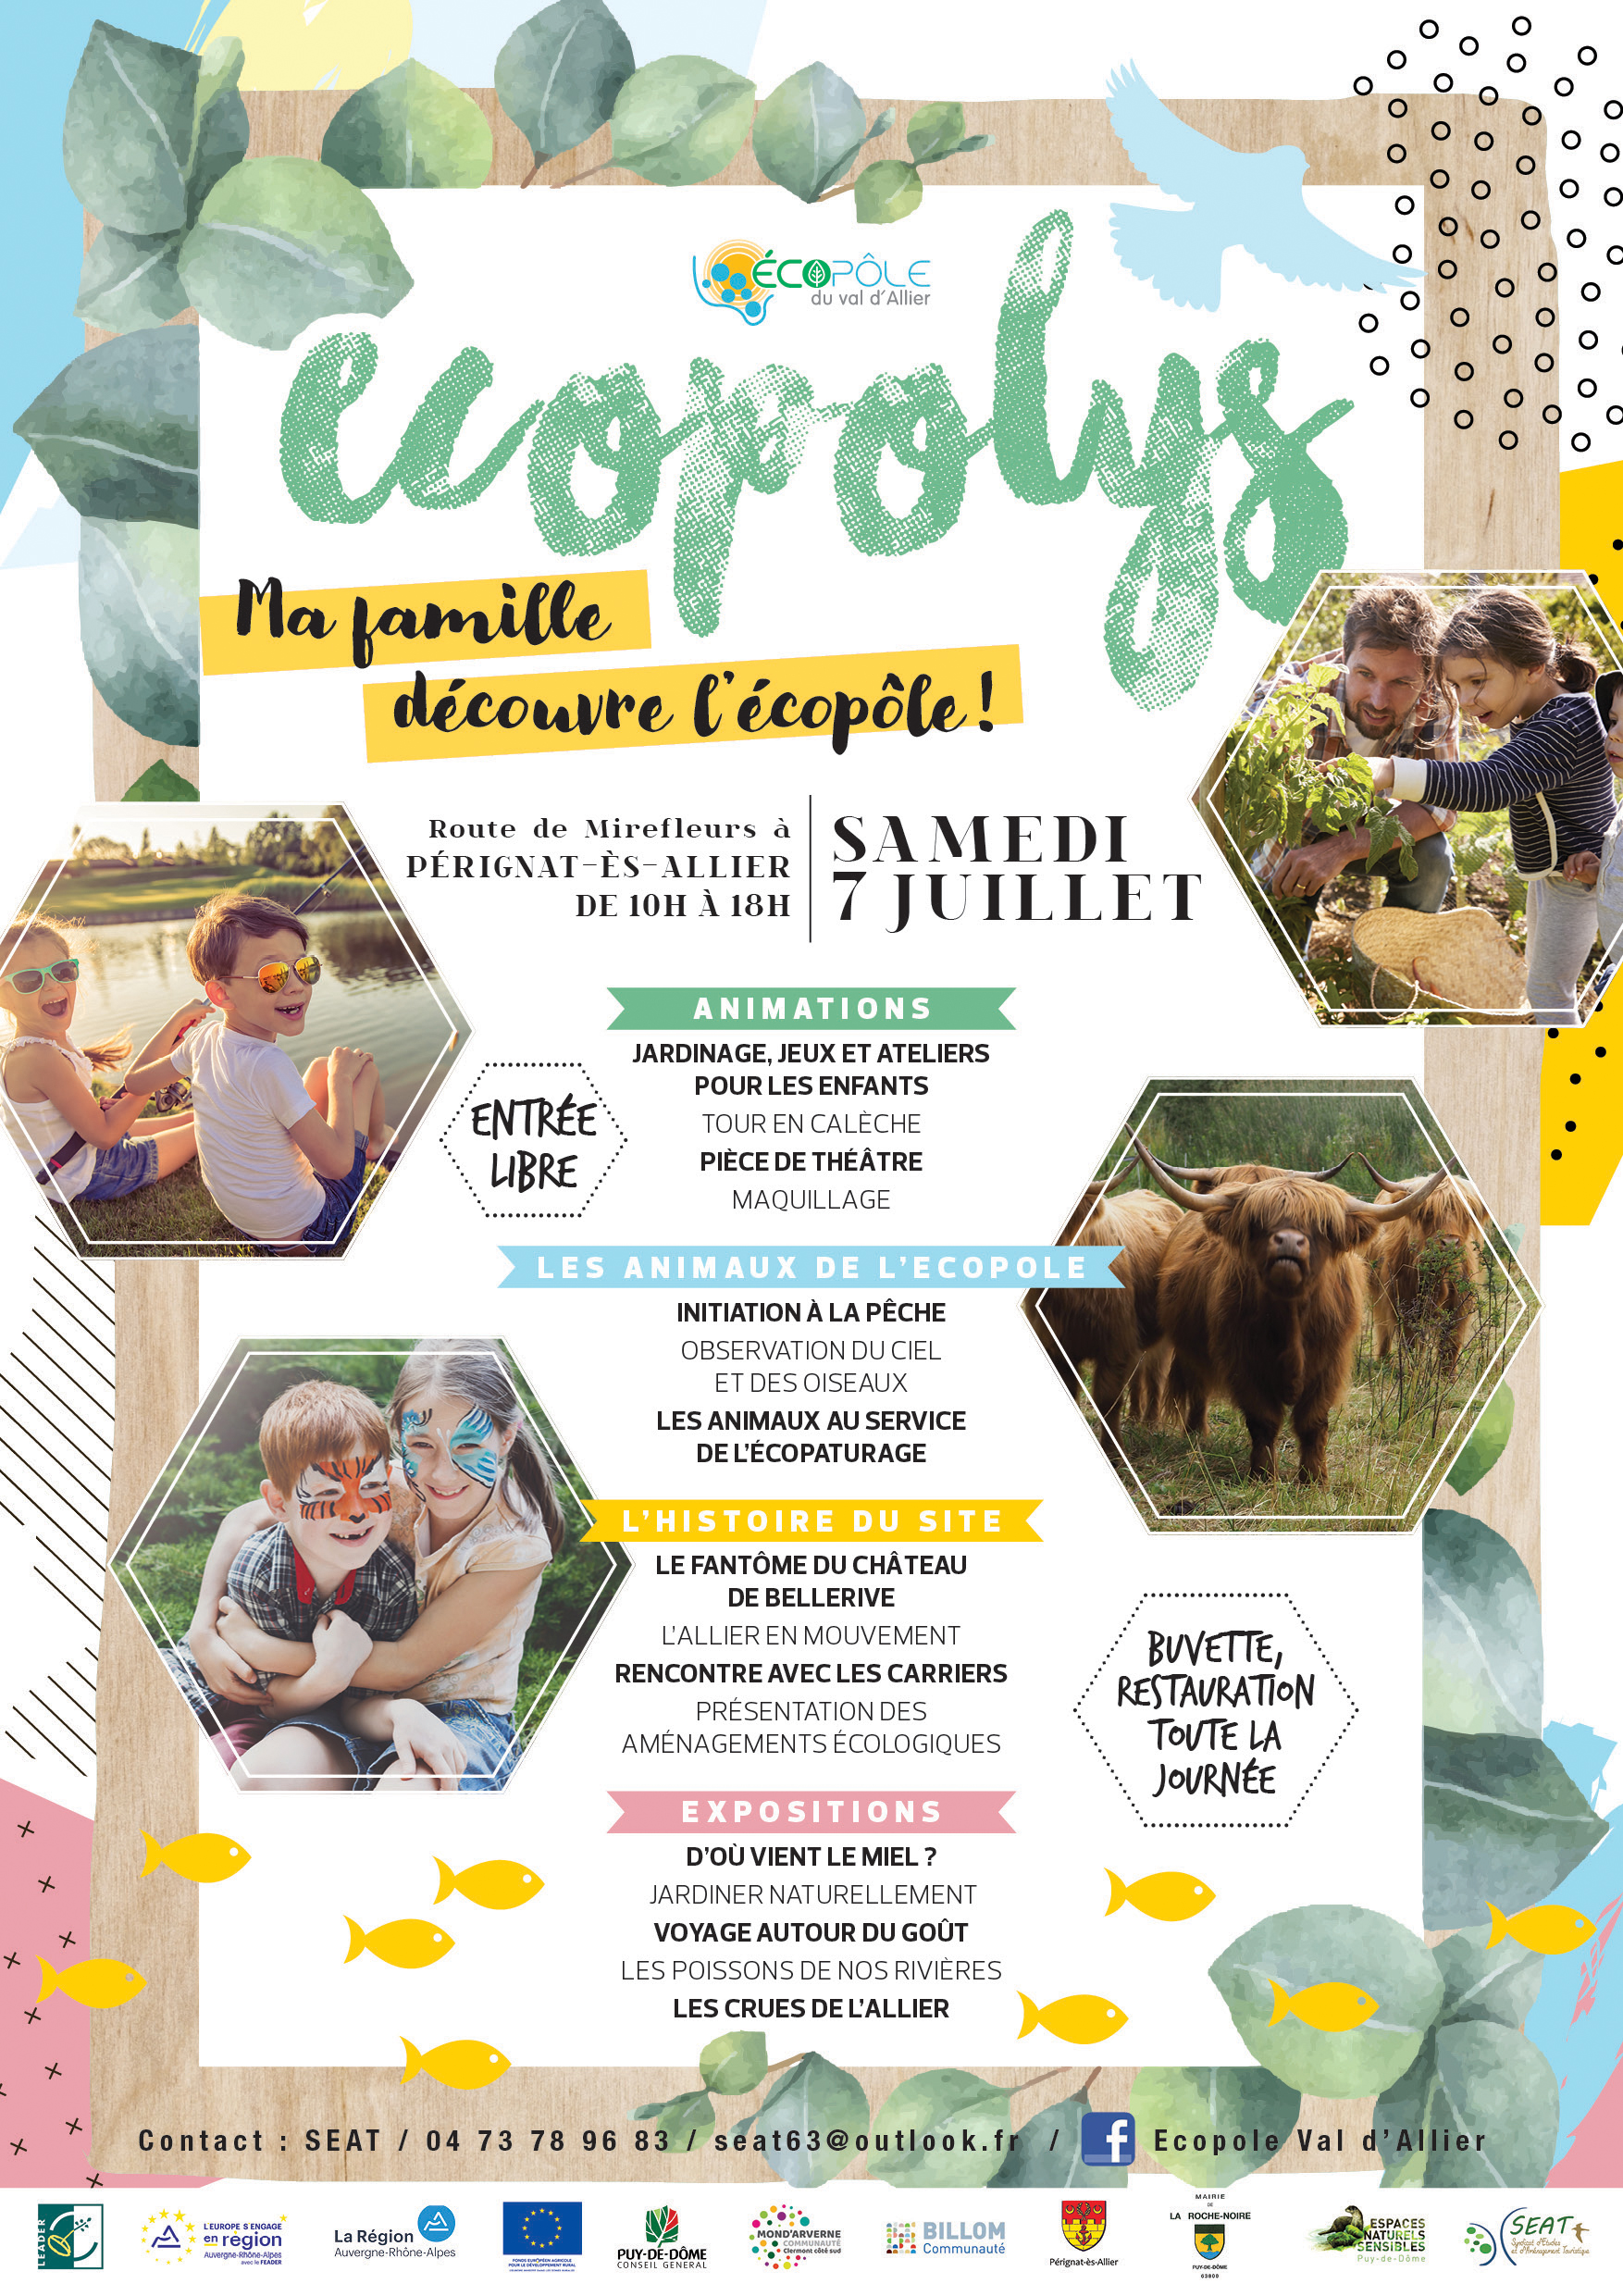 Ecopolys 2019 - SAVE THE DATE !!